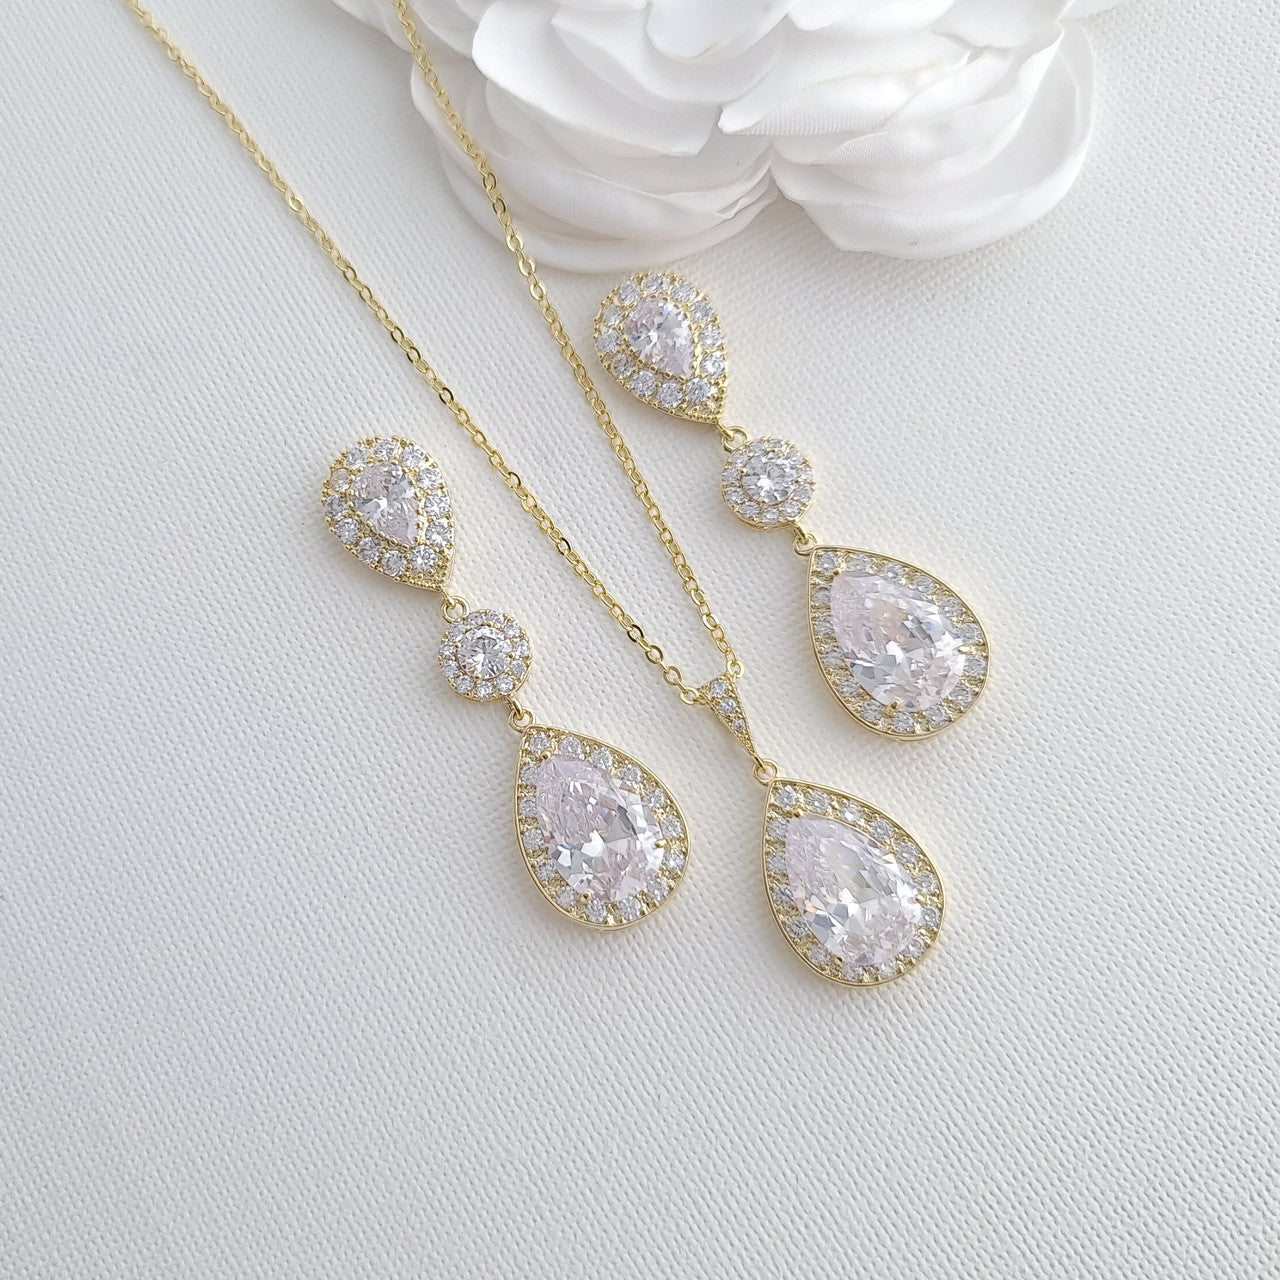 Gold Wedding Jewelry Sets for Brides With Earrings Necklace Together- Penelope